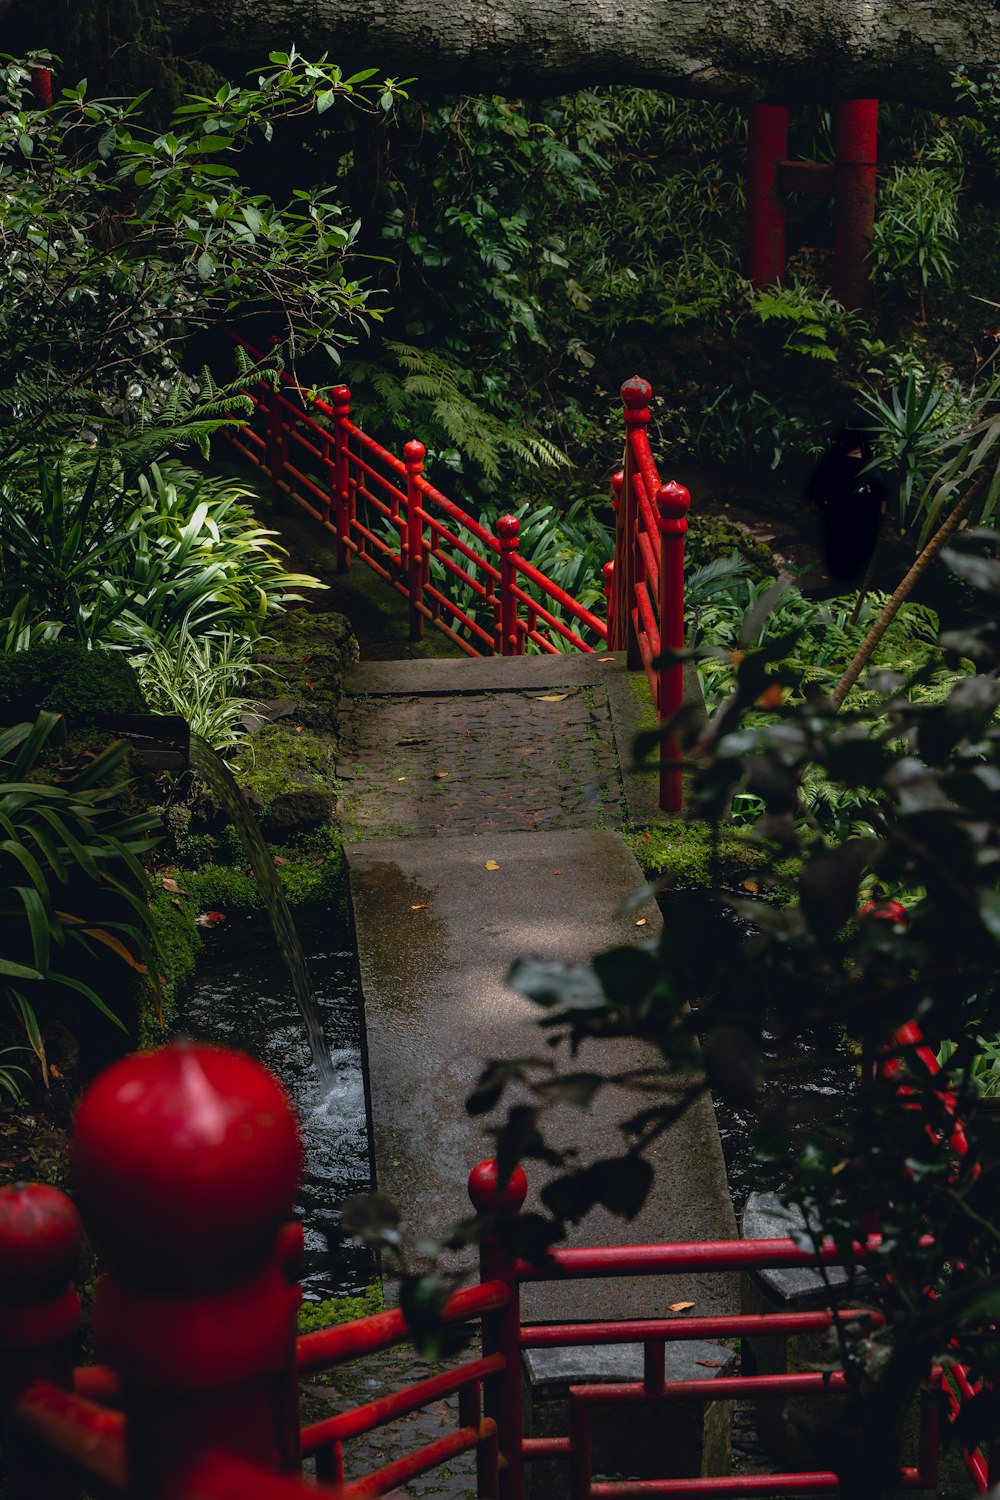 a red bridge in the middle of a lush green forest